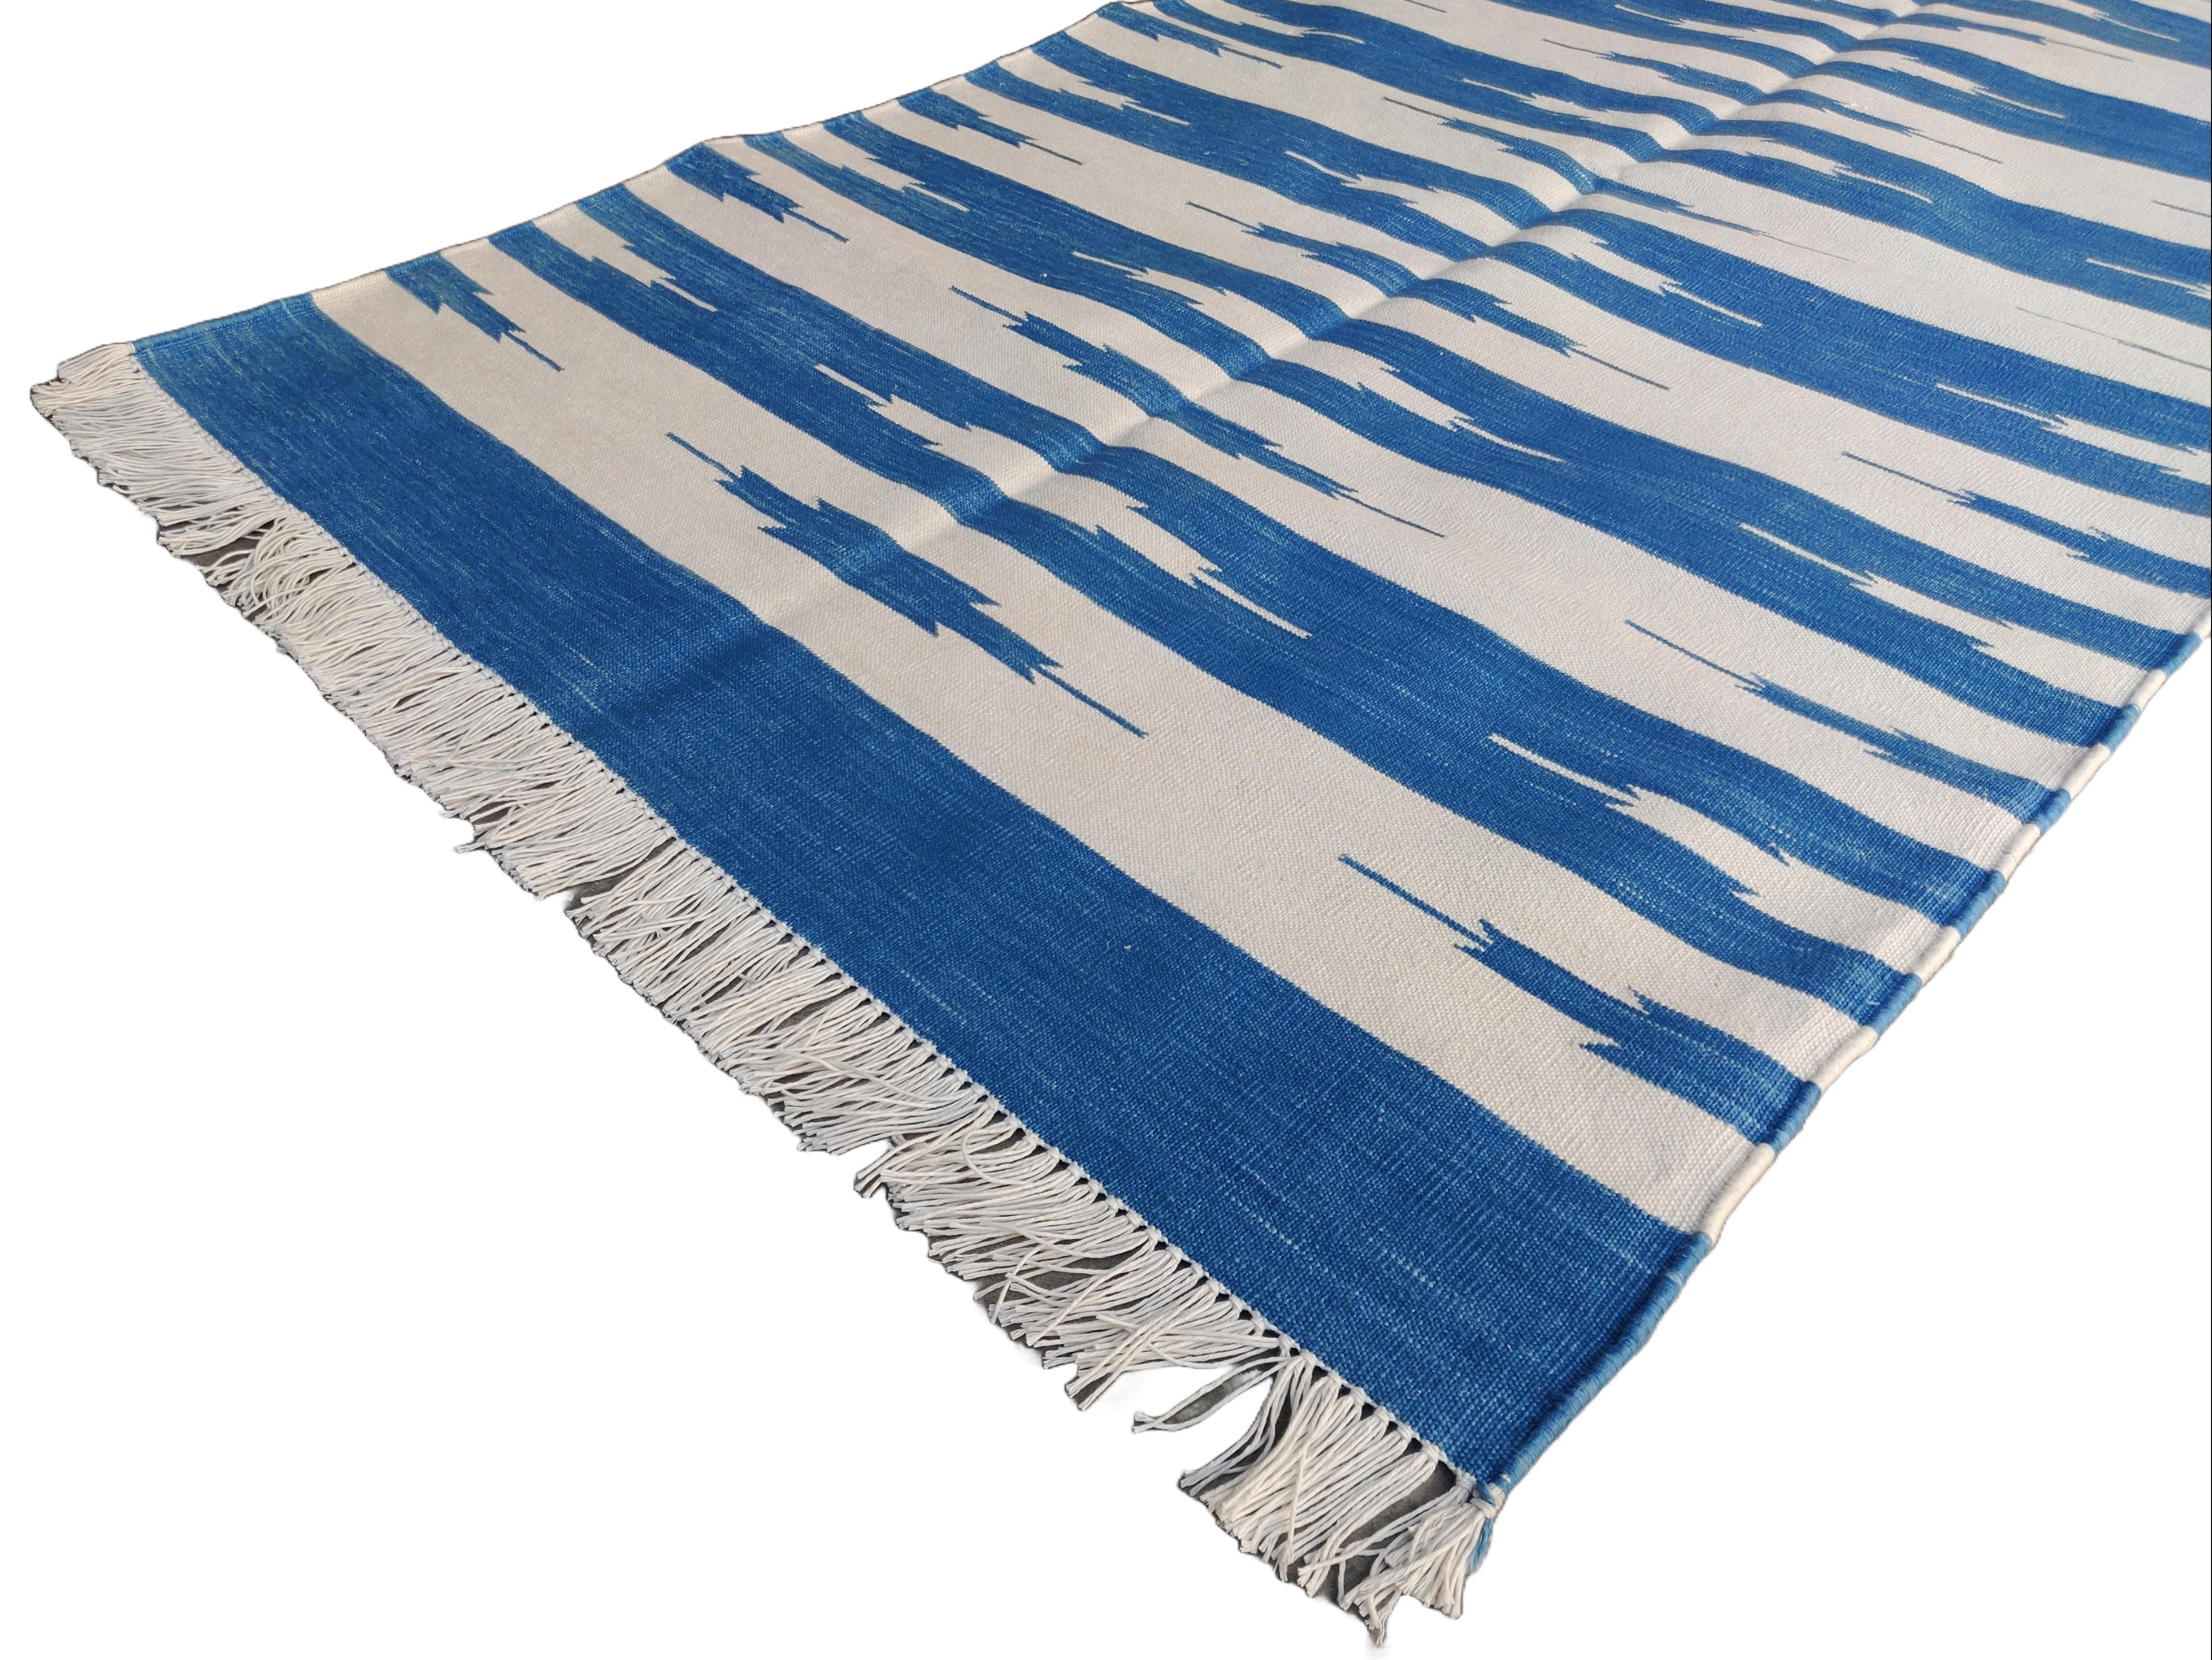 Cotton Vegetable Dyed Sky Blue and White Striped Indian Dhurrie Rug-36